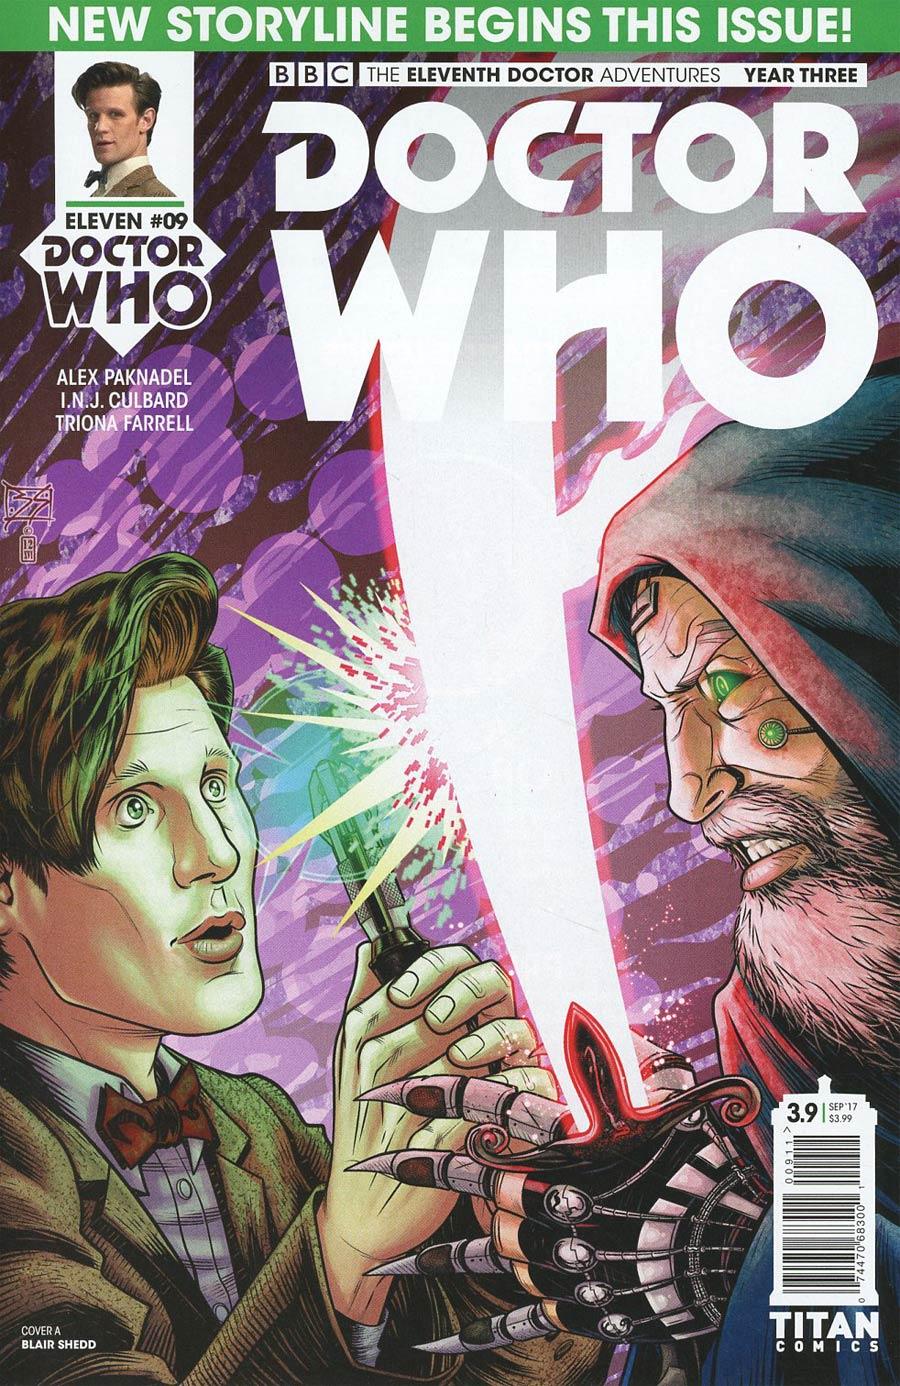 Doctor Who 11th Doctor Year Three Vol. 1 #9